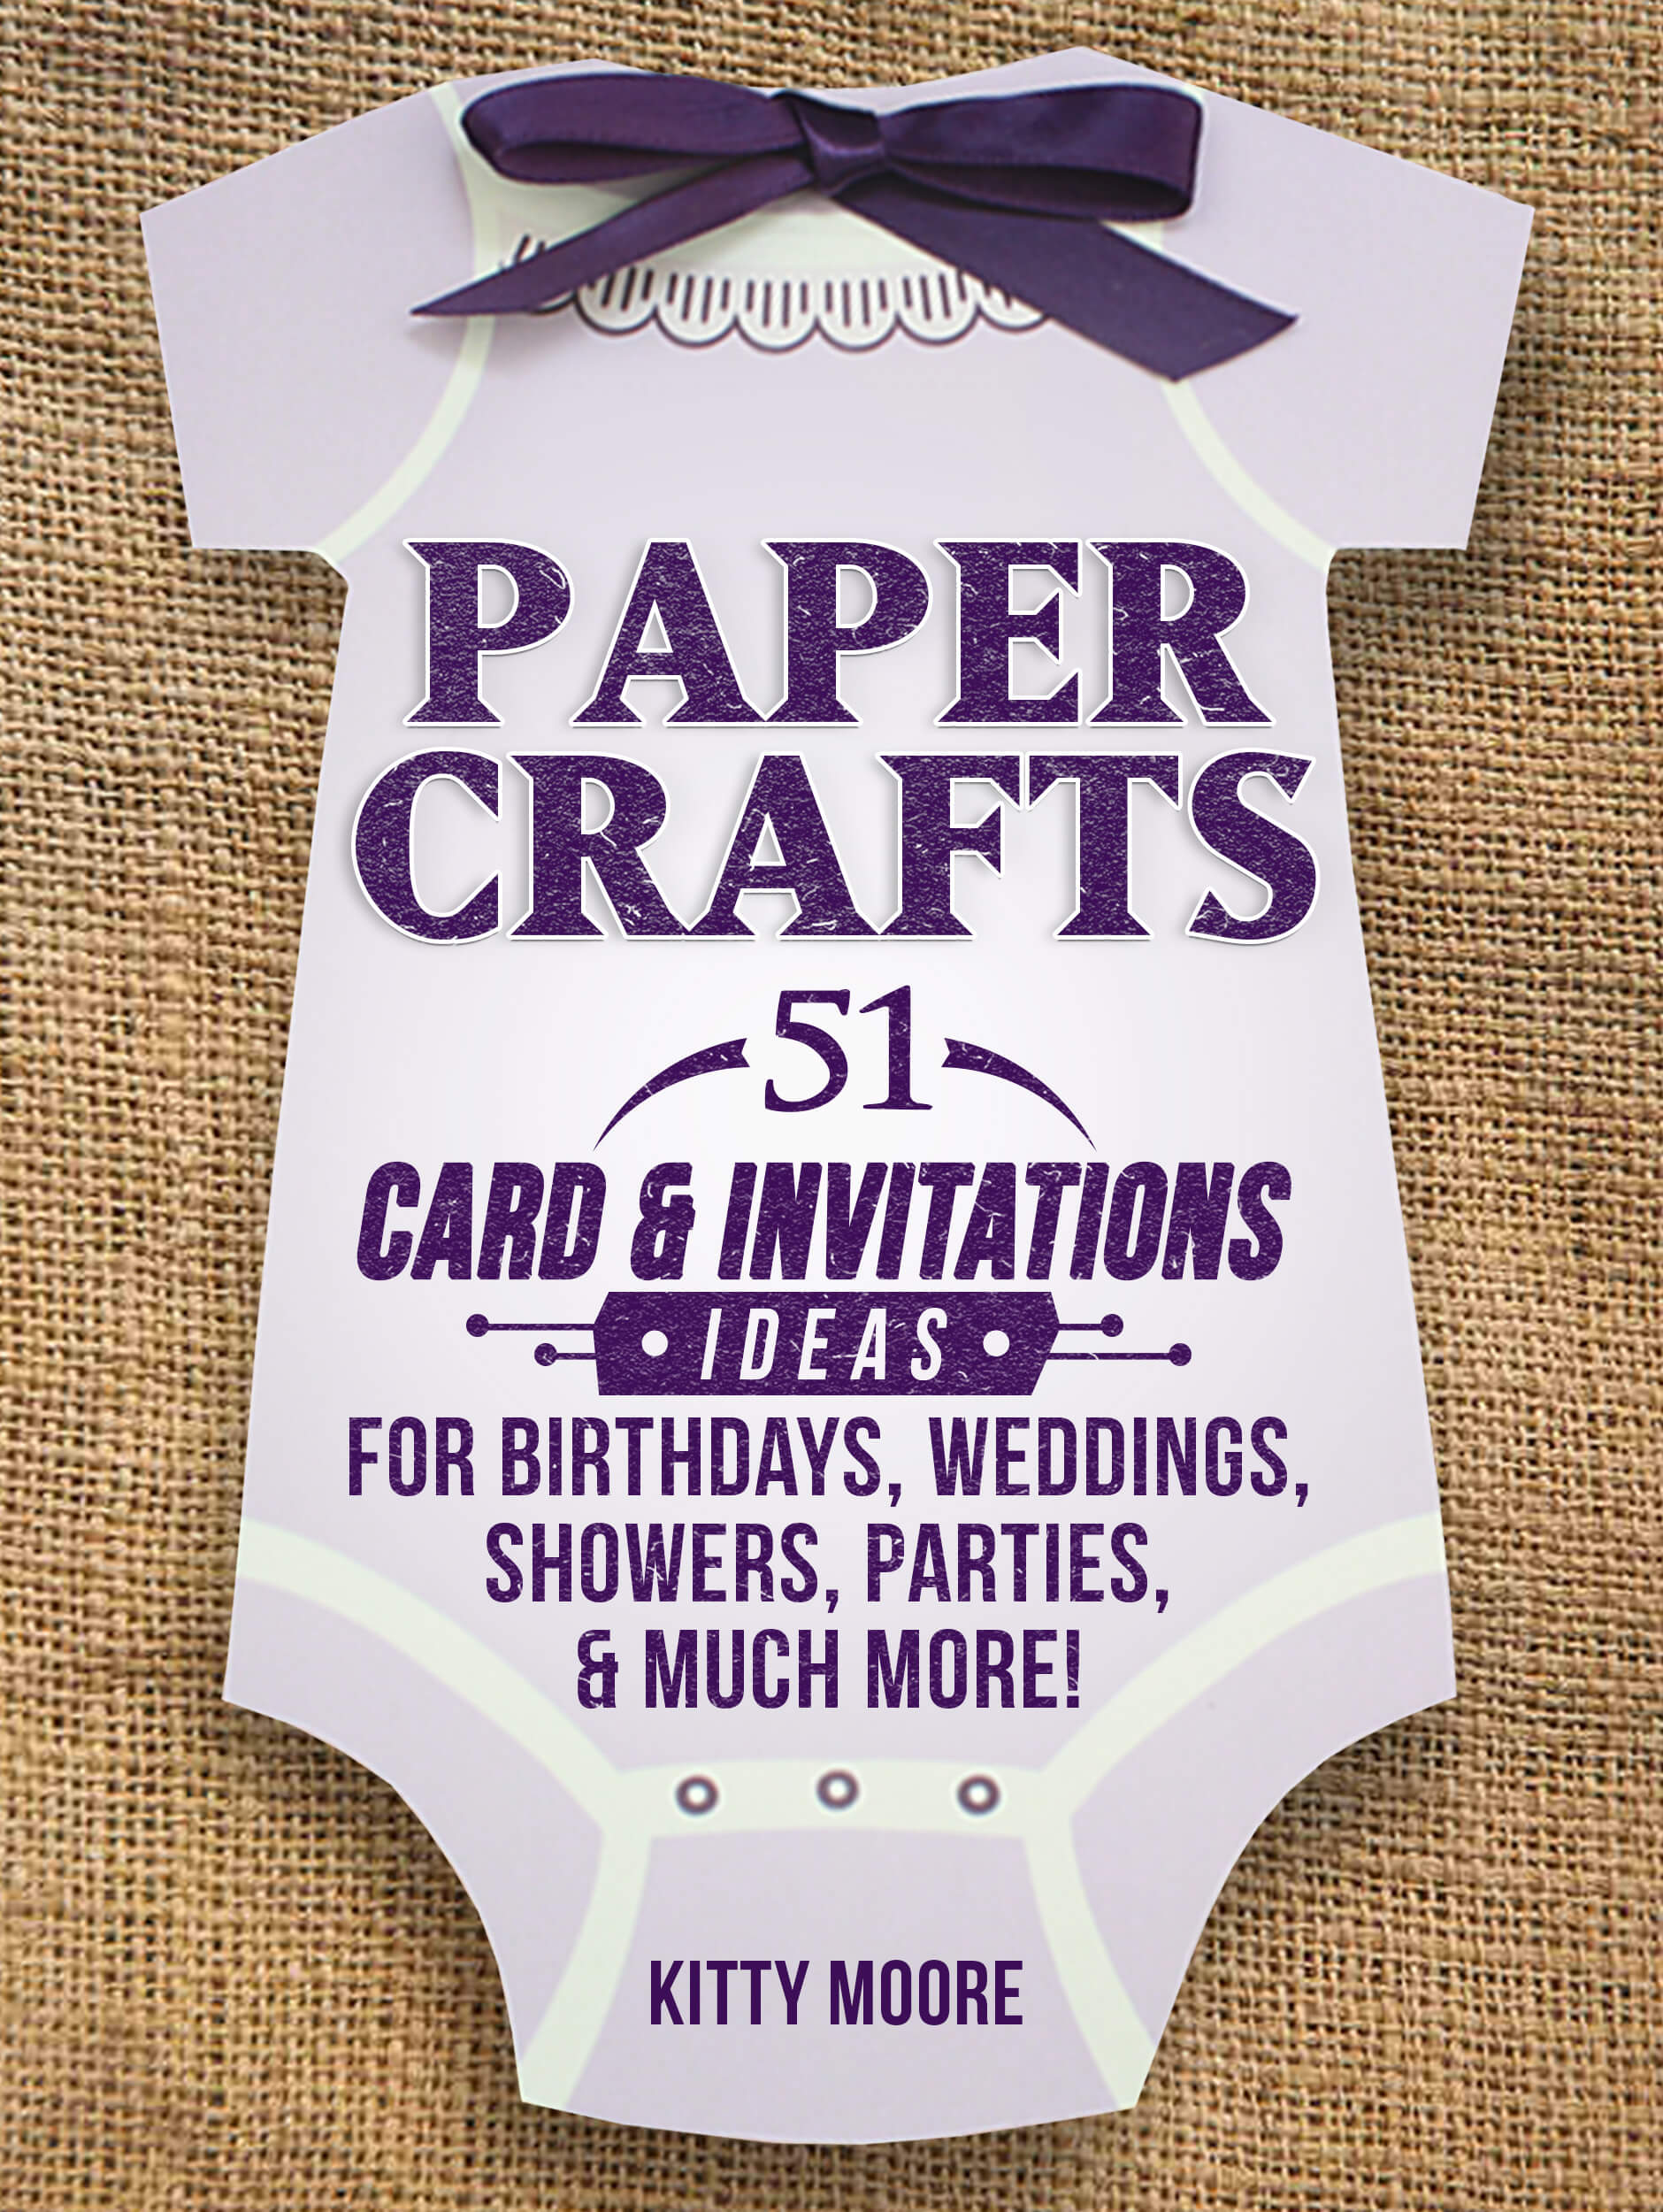 FREE: Paper Crafts: 51 Card & Invitation Crafts For Birthdays, Weddings, Showers, Parties, & Much More! (2nd Edition) by Kitty Moore